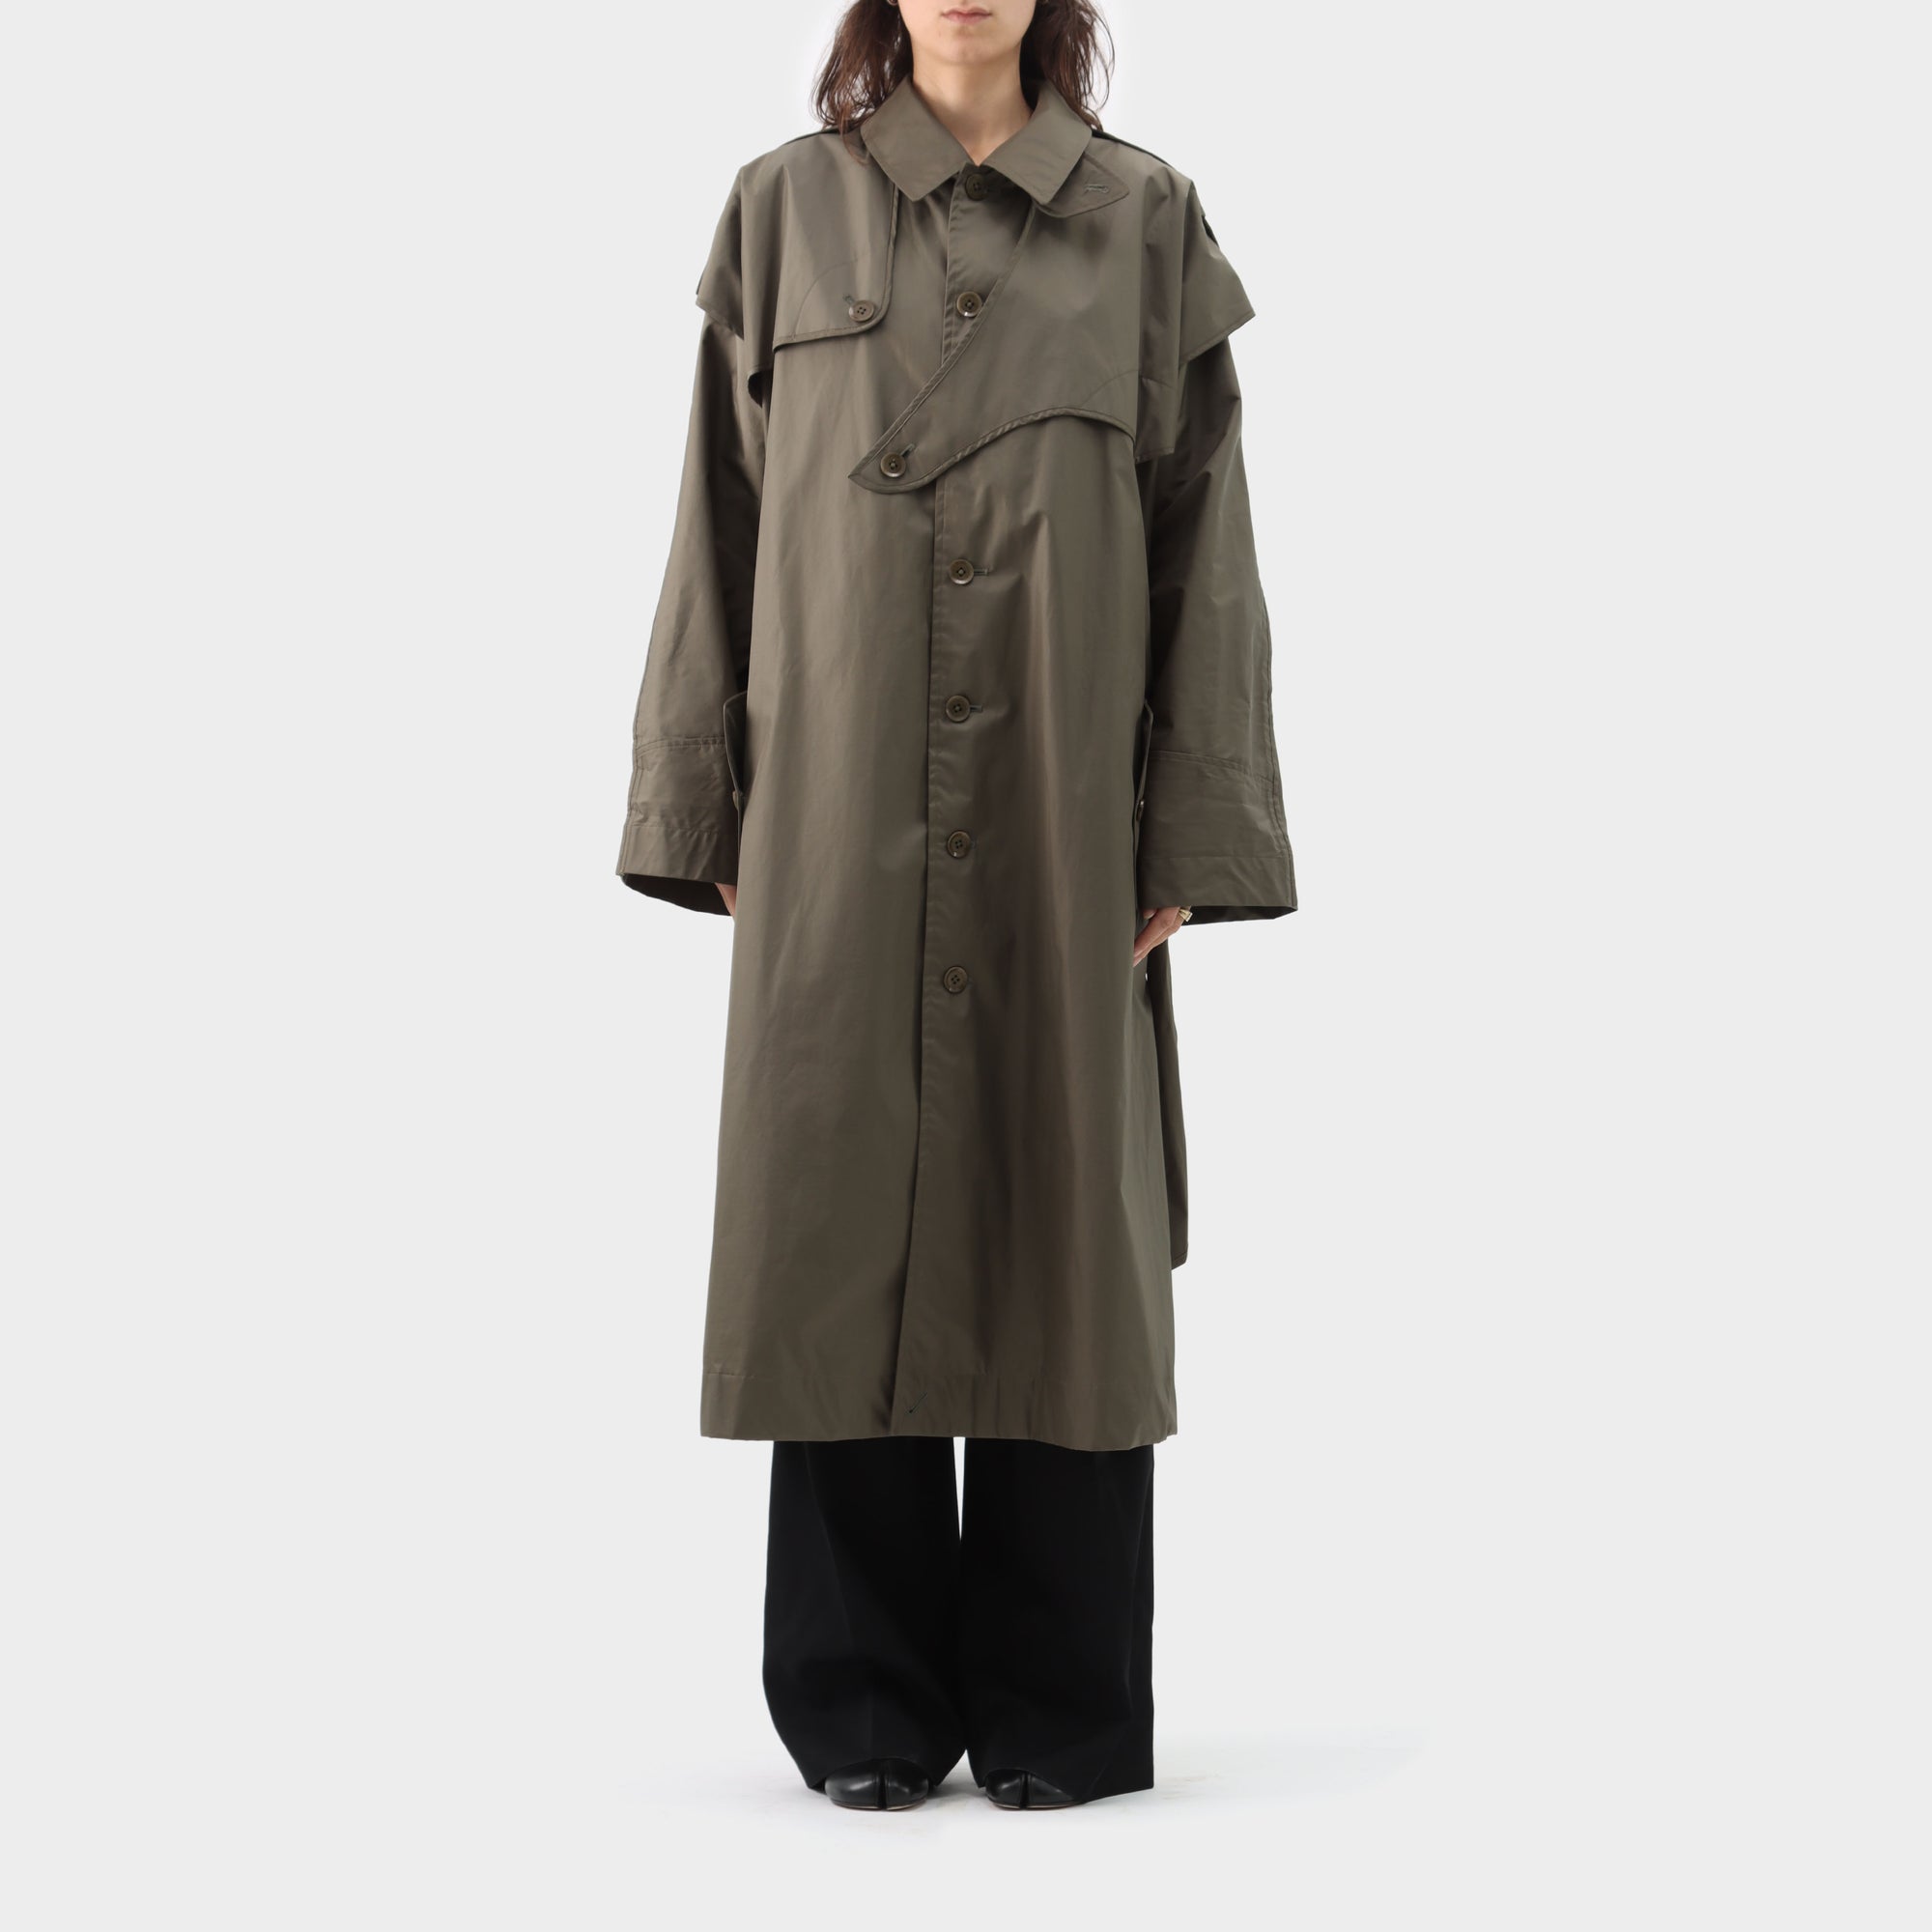 Yohji Yamamoto Pour Homme Wool Lined Trench Coat